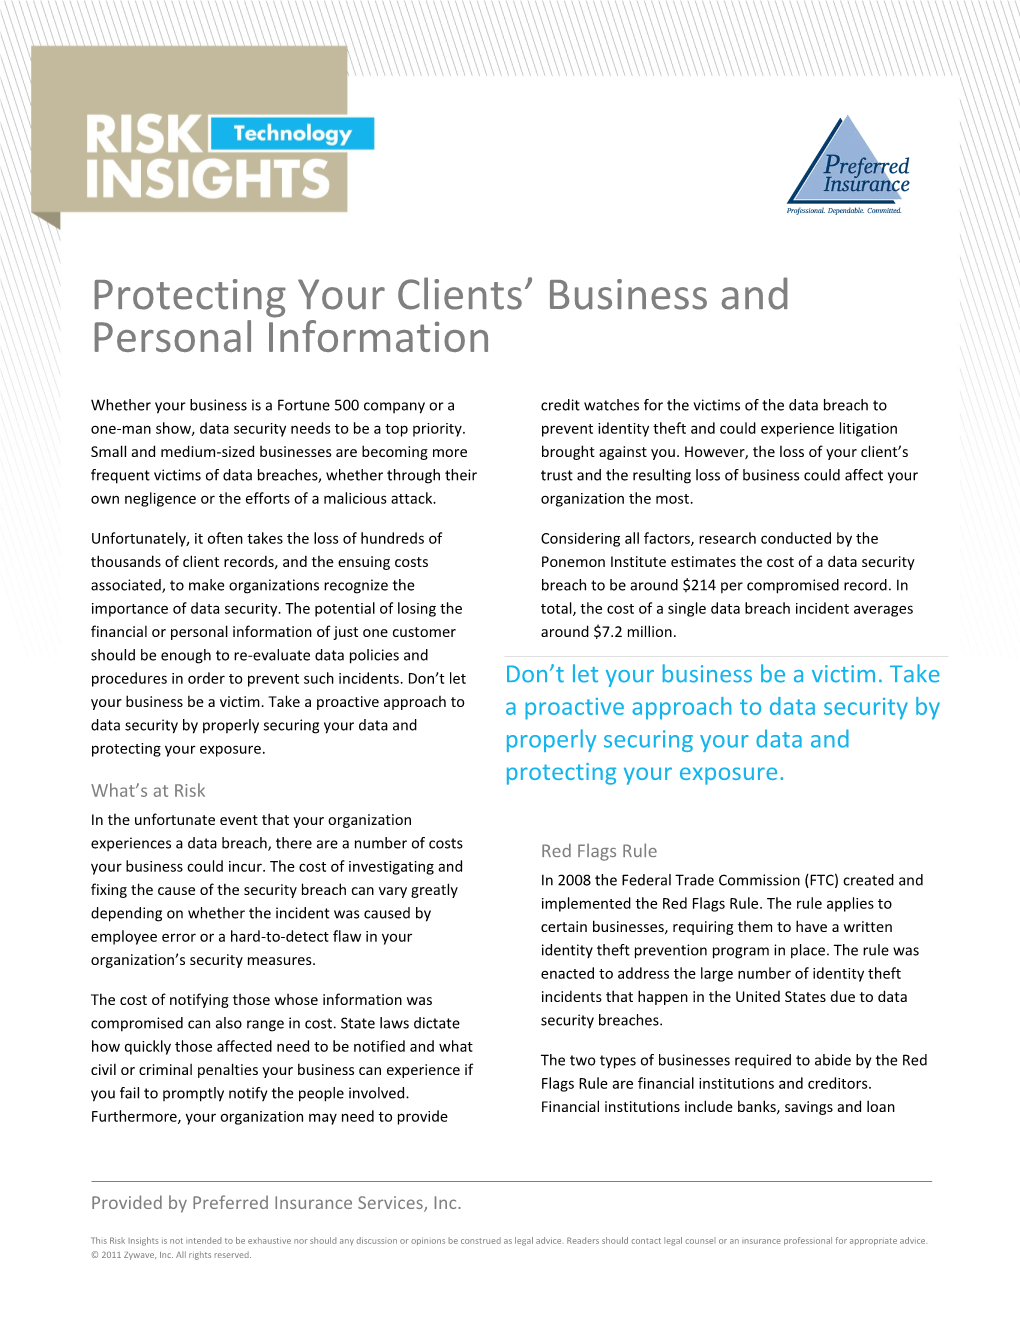 Protecting Your Clients Business and Personal Information